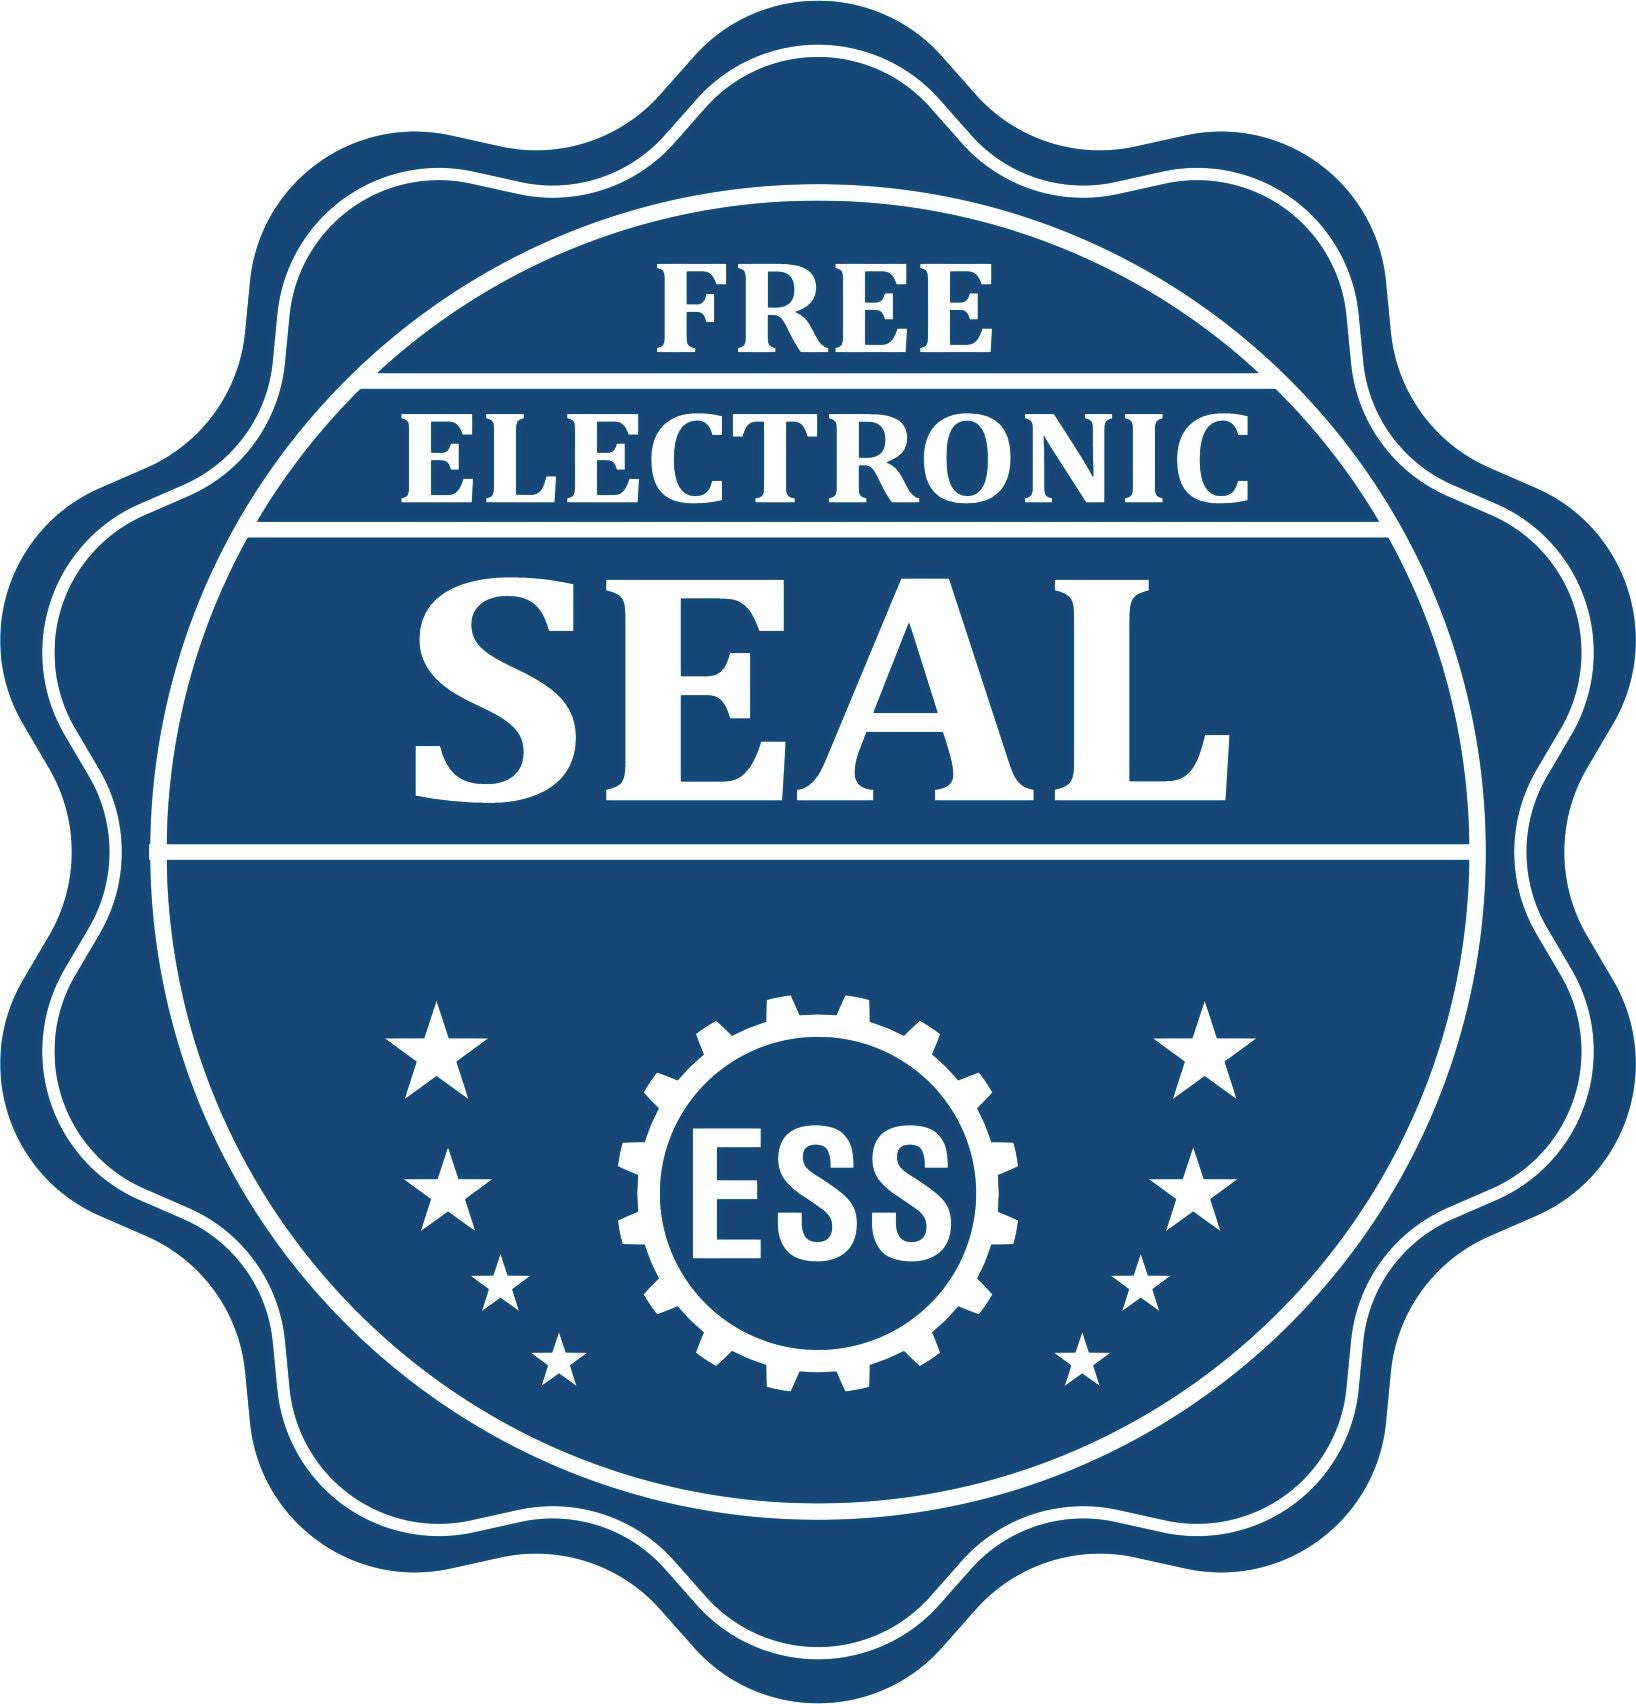 A badge showing a free electronic seal for the Gift Wisconsin Landscape Architect Seal with stars and the ESS gear on the emblem.